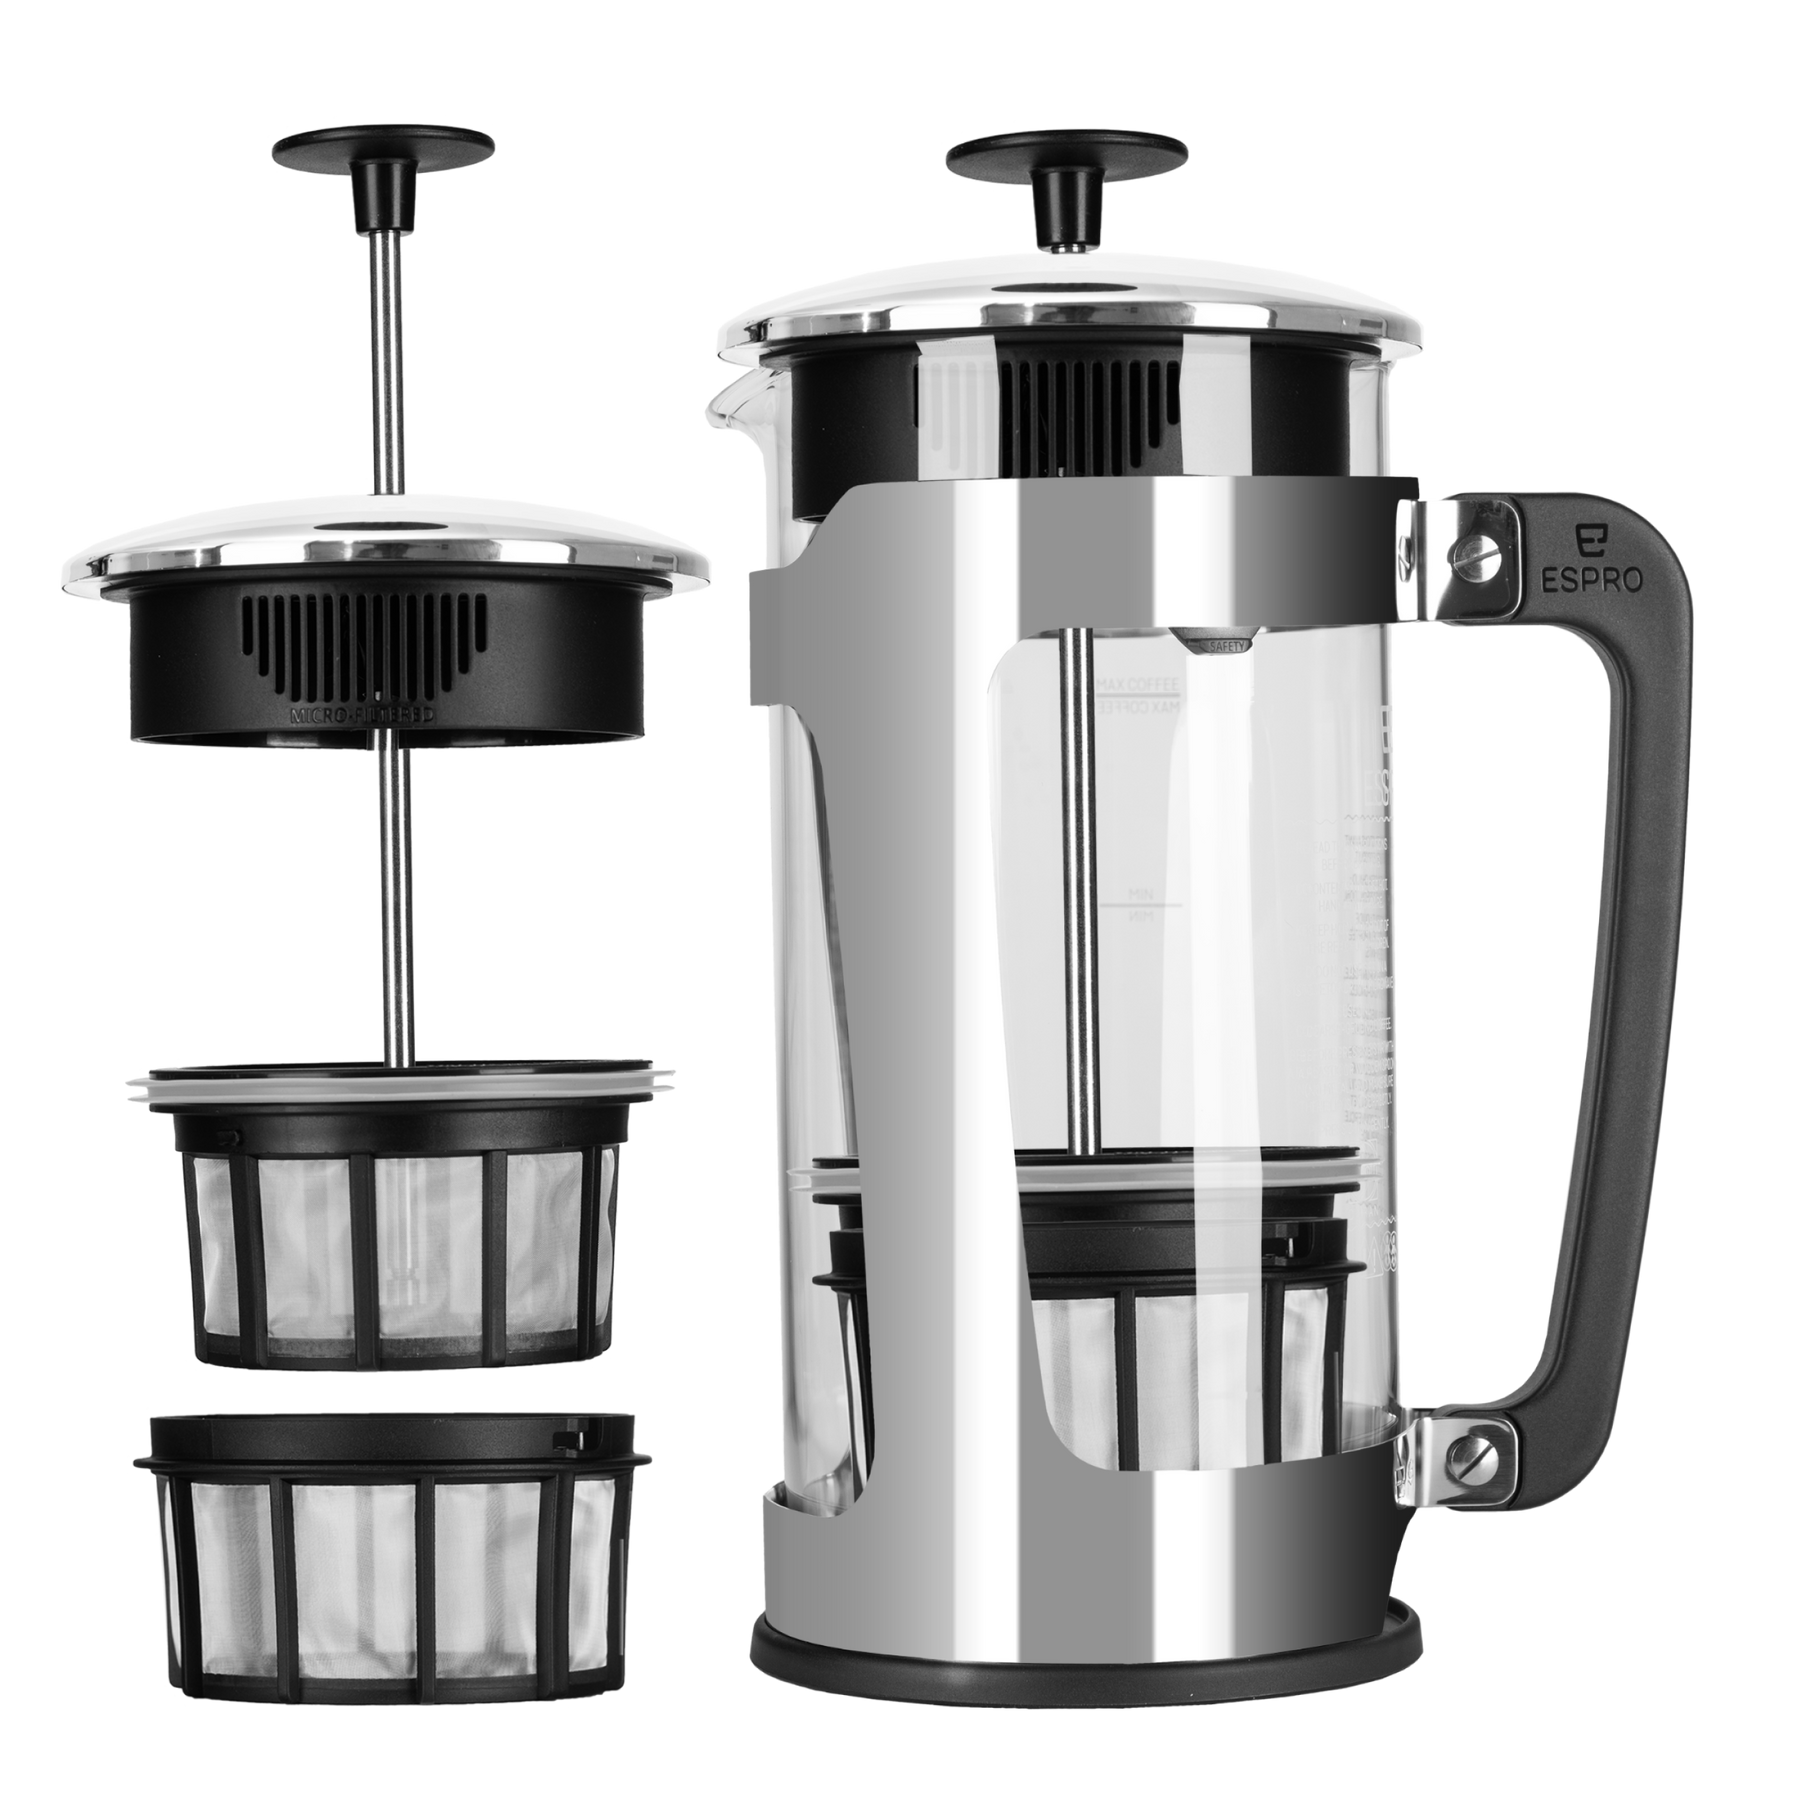 Espro P5 French Press Coffee Maker Stainless Steel